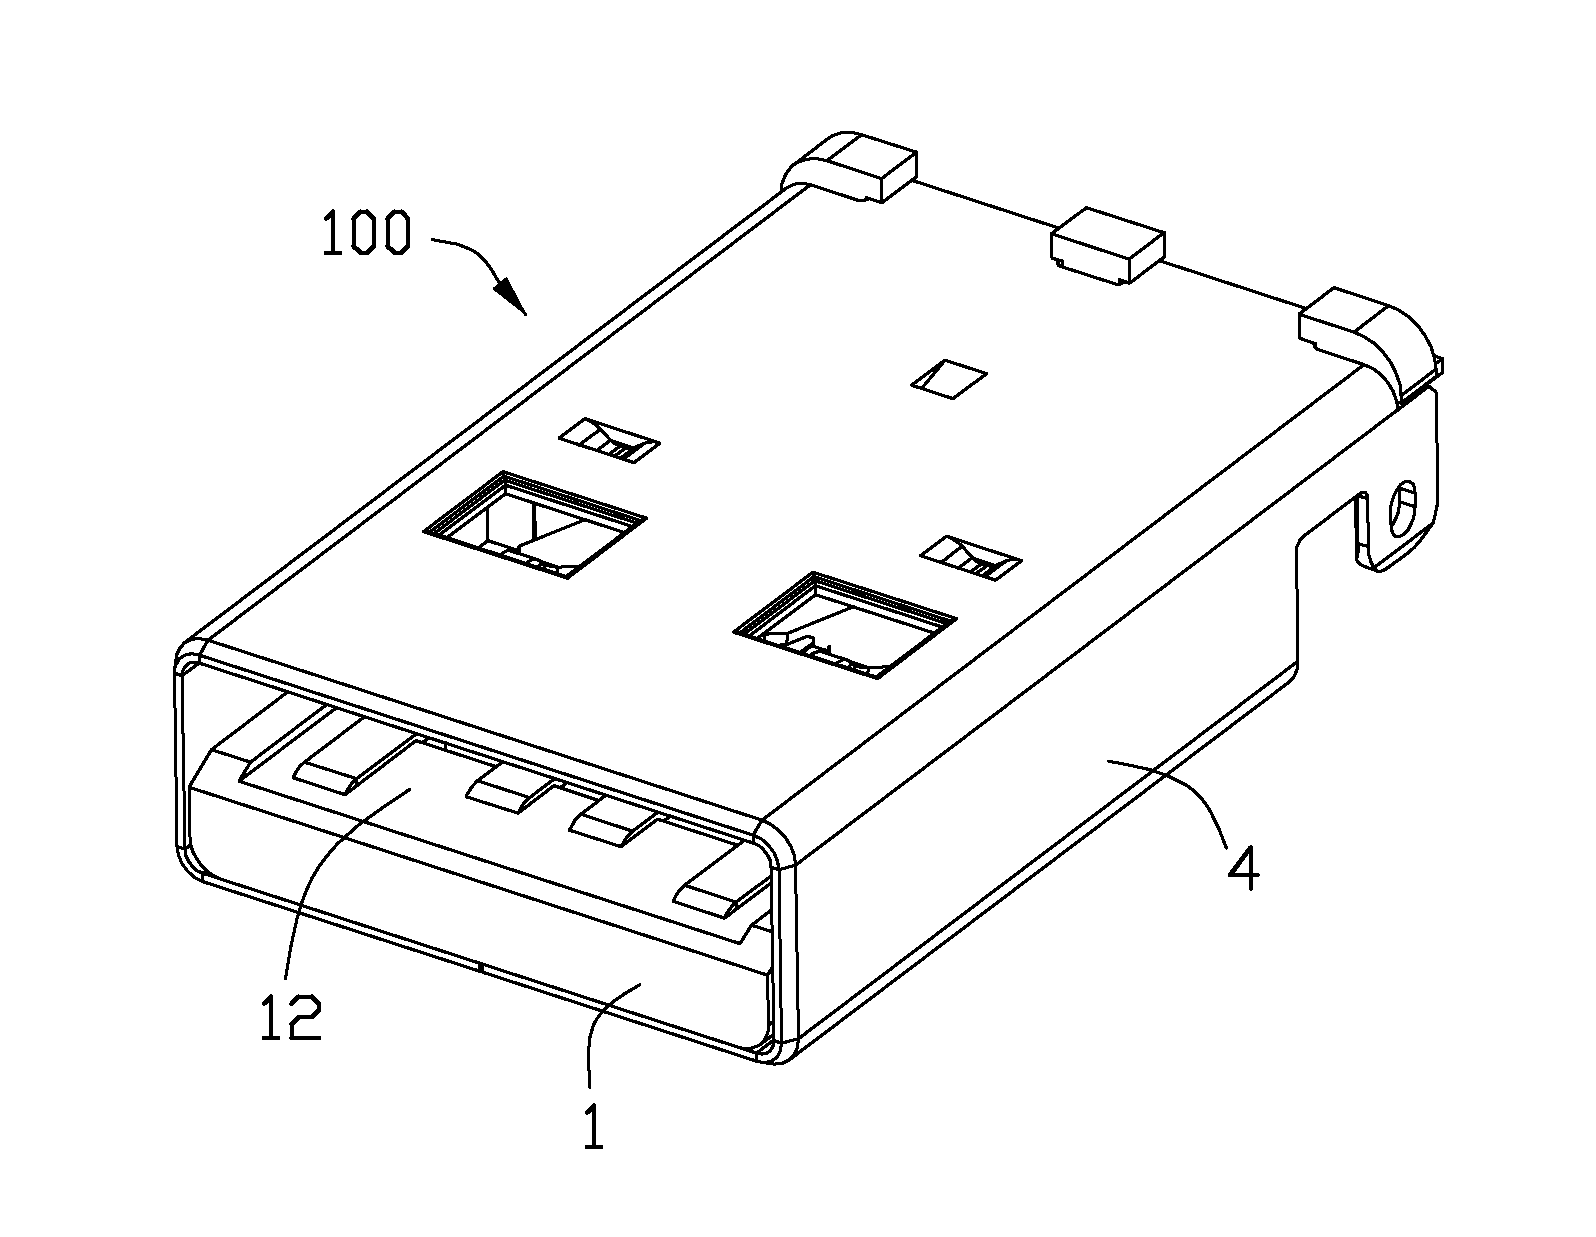 Connector having improved housing to position contacts thereof reliably